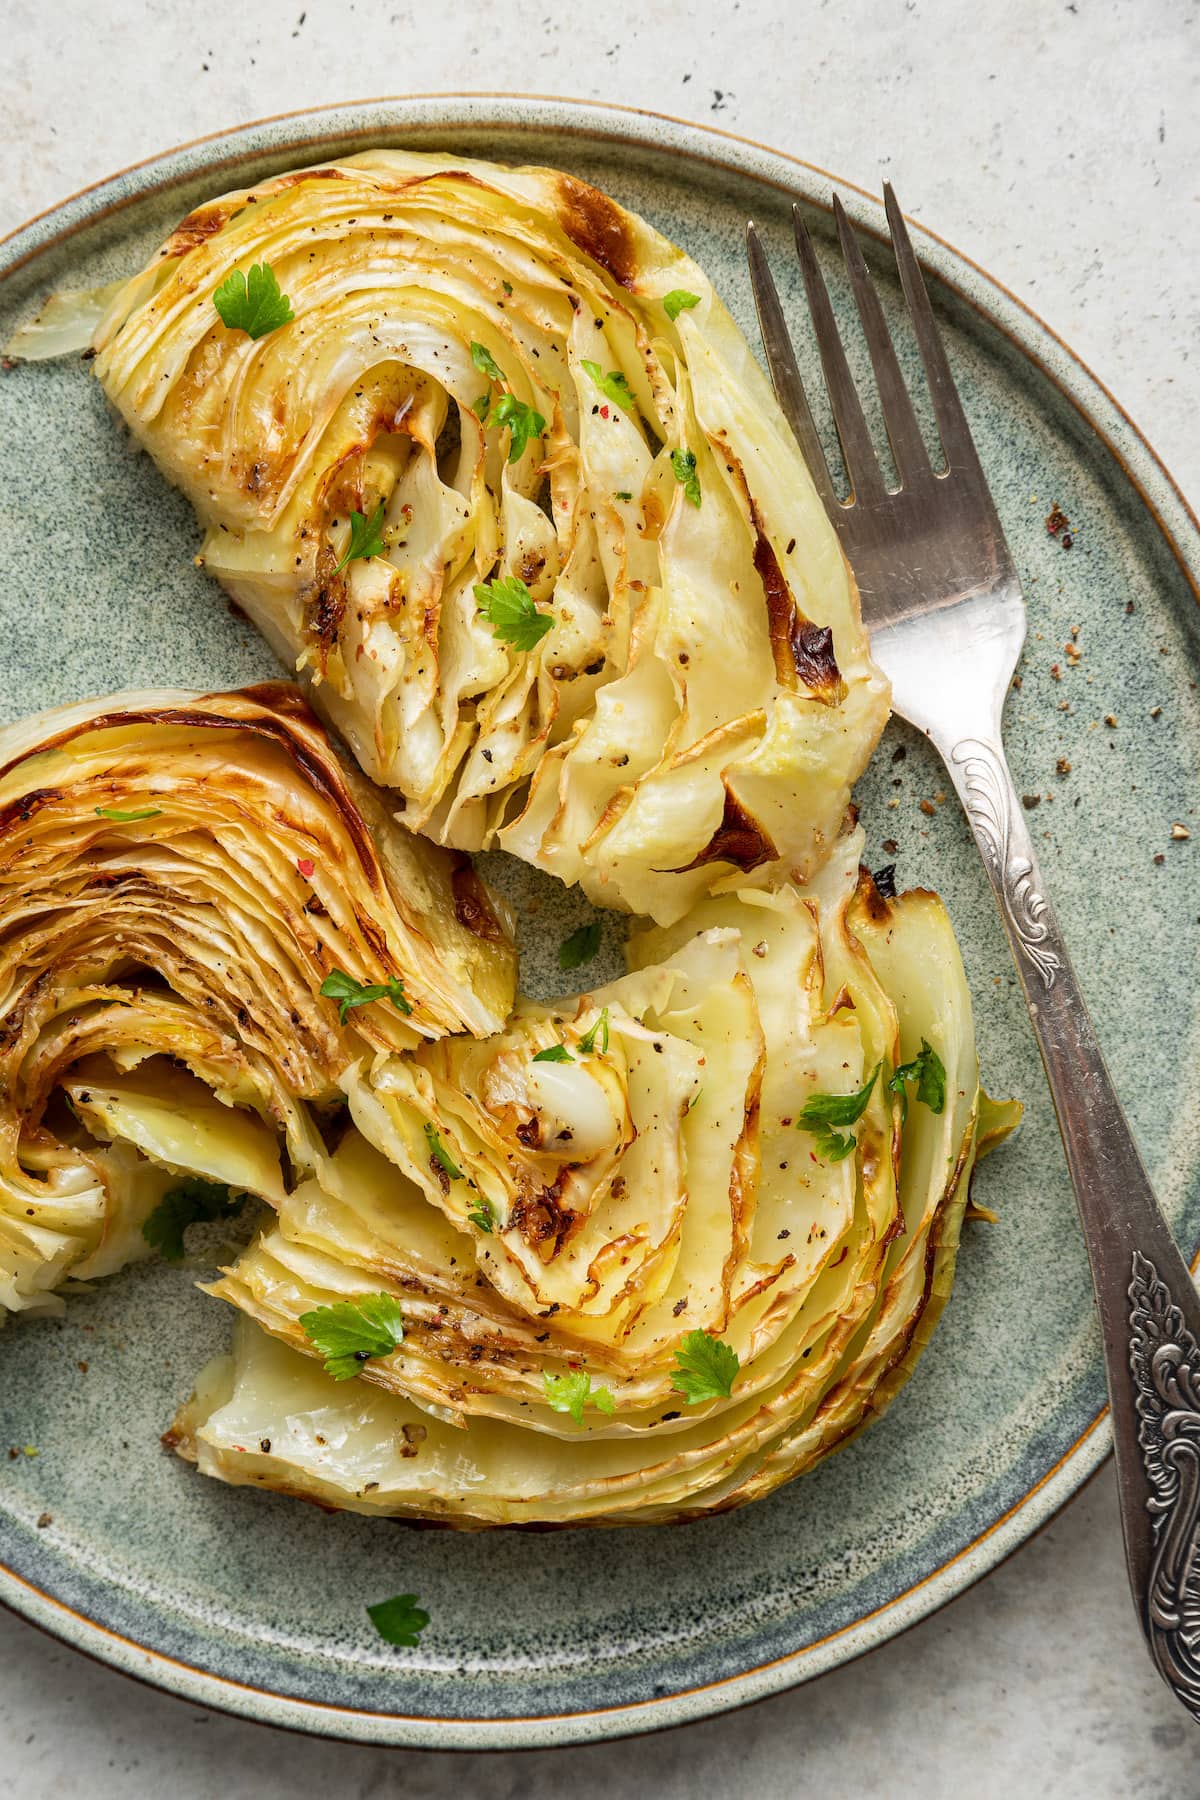 Roasted cabbage on a plate with a fork.